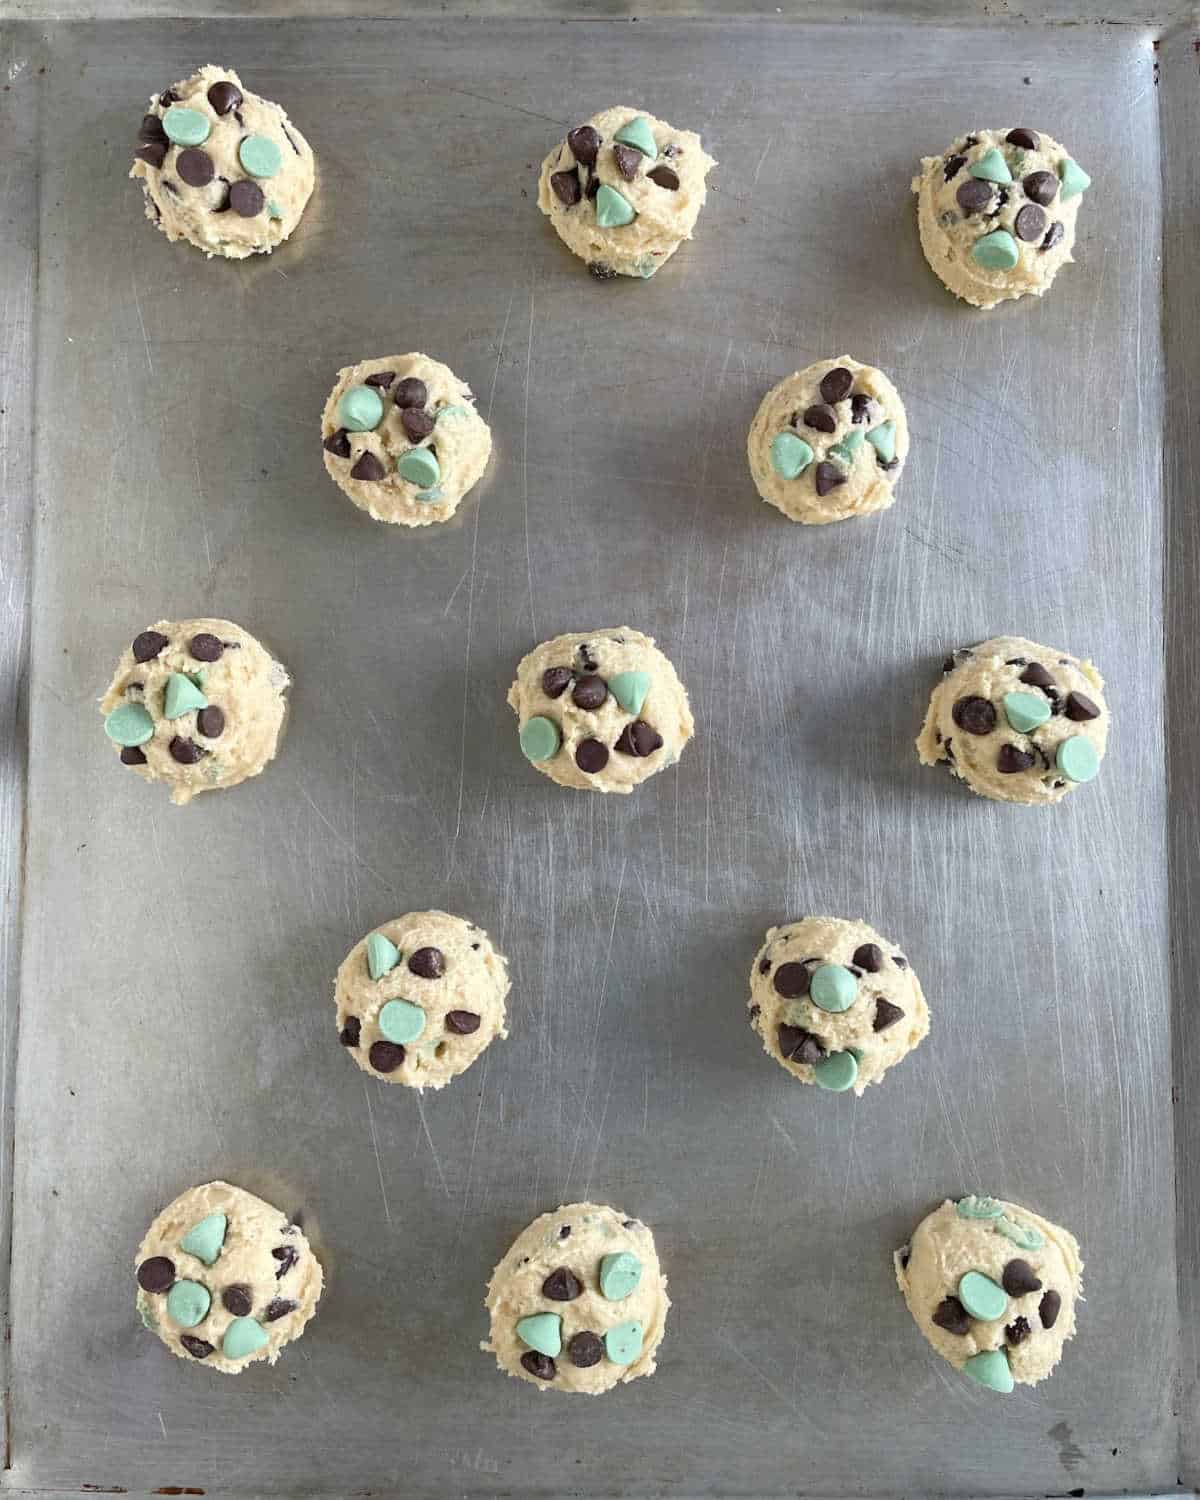 Several scoops of mint and chocolate chip cookie dough on a metal baking sheet.